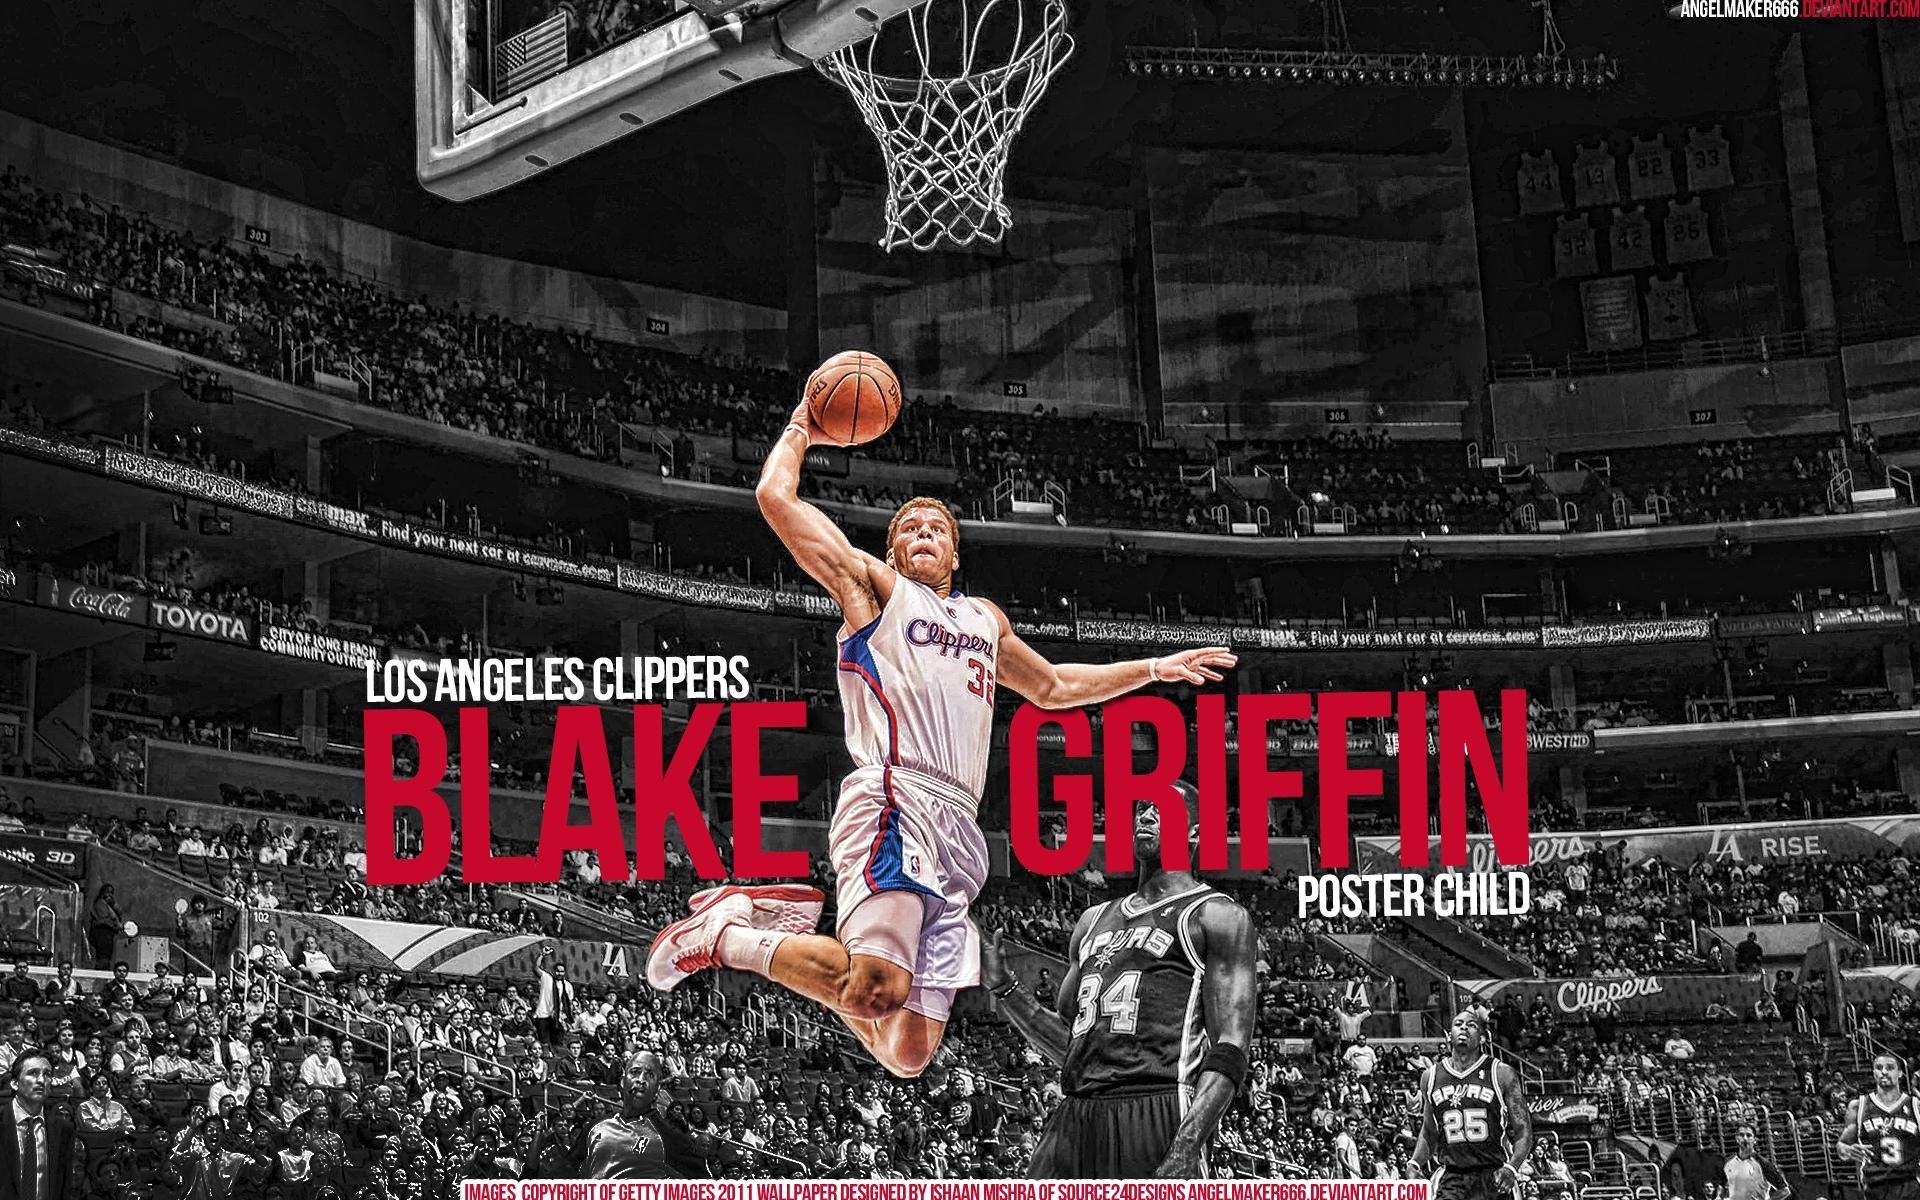 Blake Griffin, LA poster child. Los angeles clippers, Blake